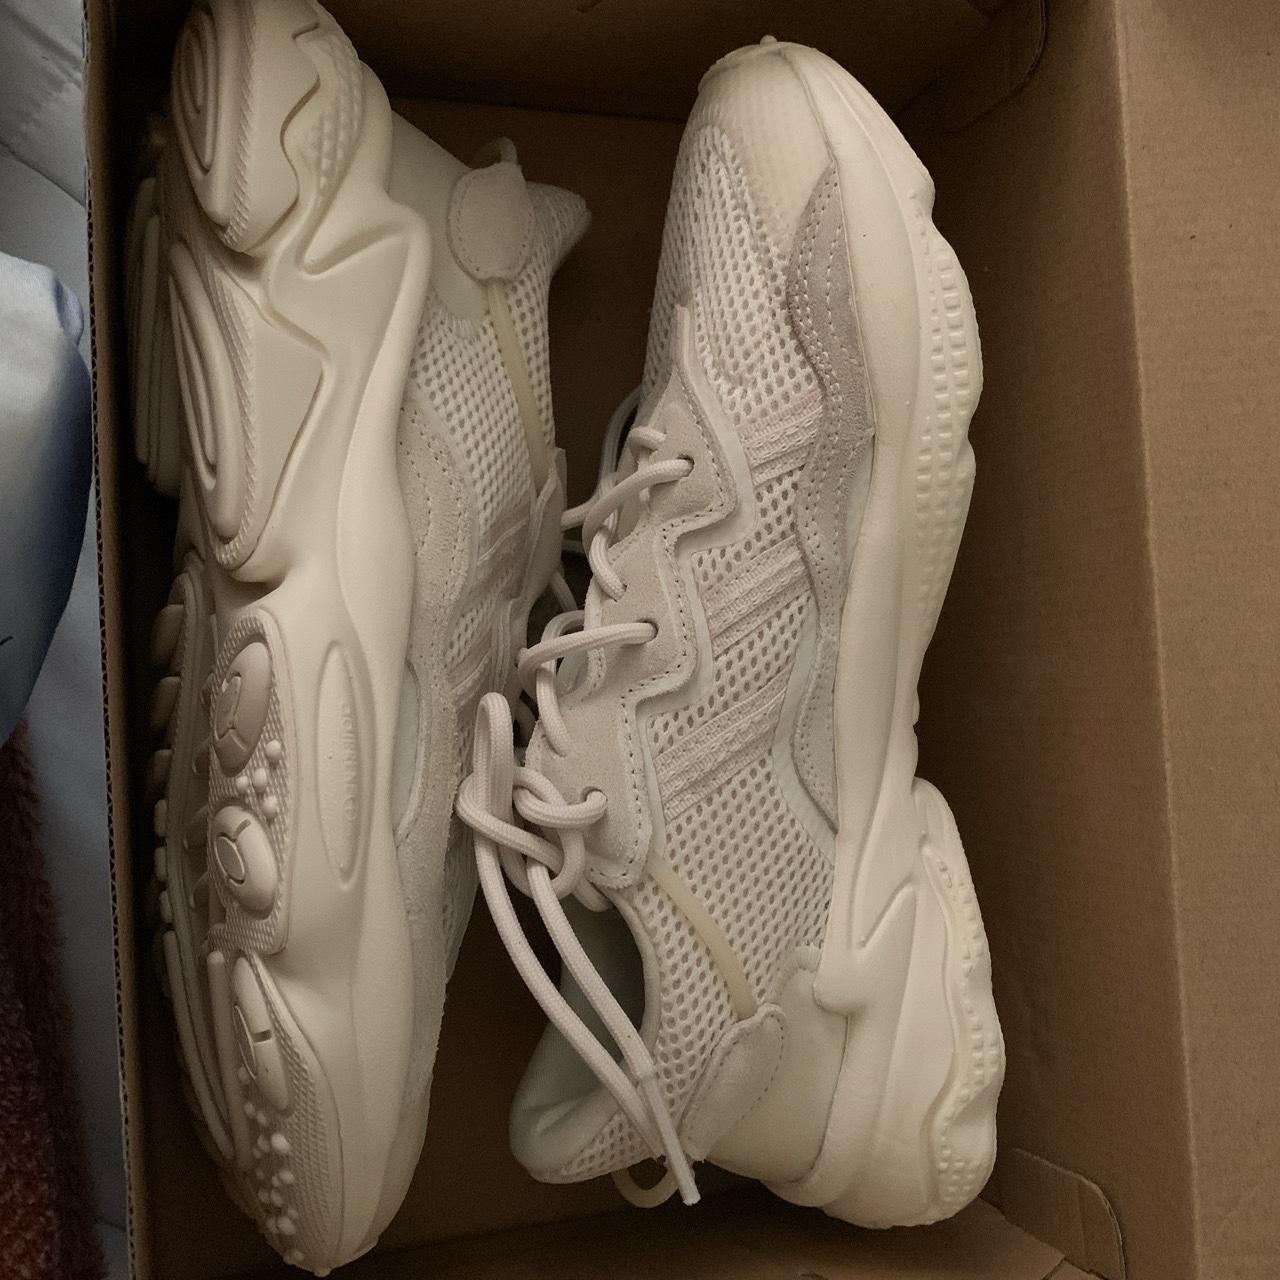 Product Image 2 - ADIDAS OZWEEGO SHOES👟
Brand New
Color Cream